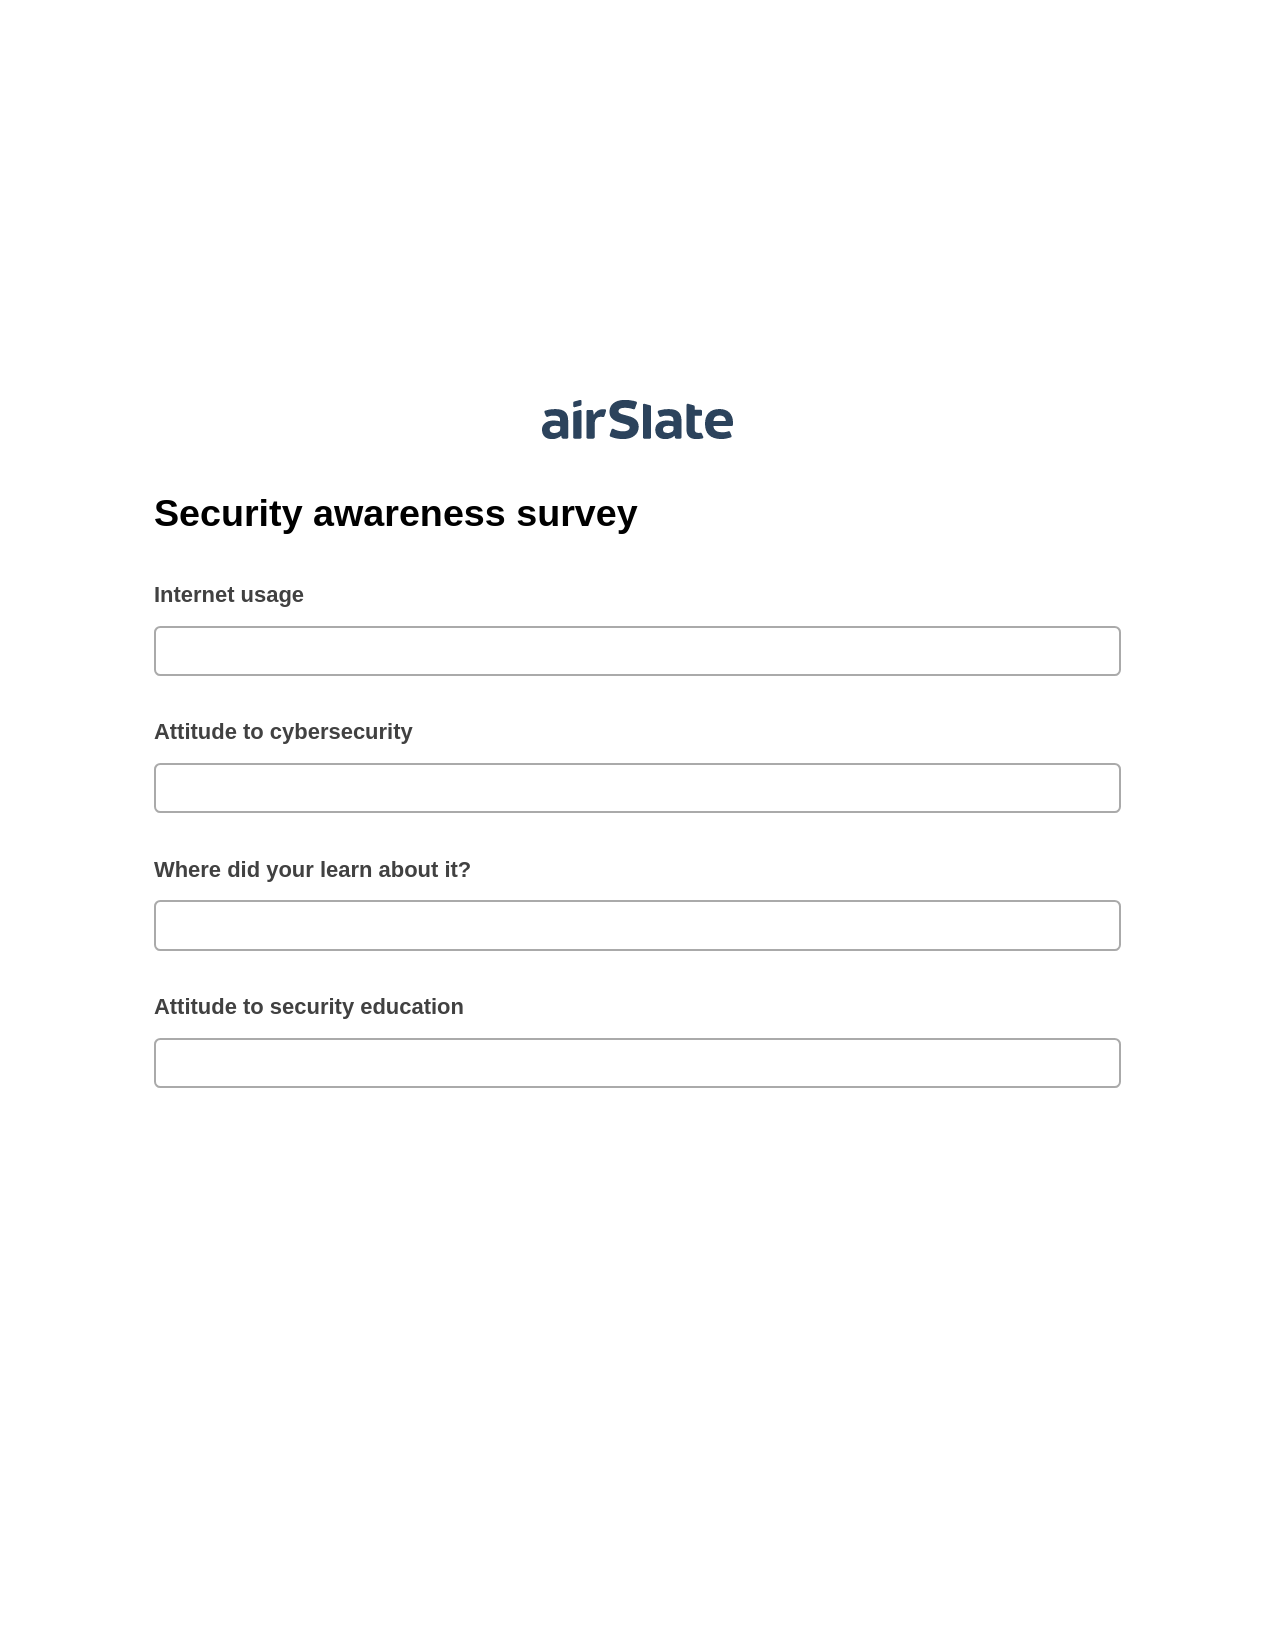 Multirole Security awareness survey Pre-fill from CSV File Dropdown Options Bot, Create slate in another Flow Bot DEPRECATED, Post-finish Document Bot